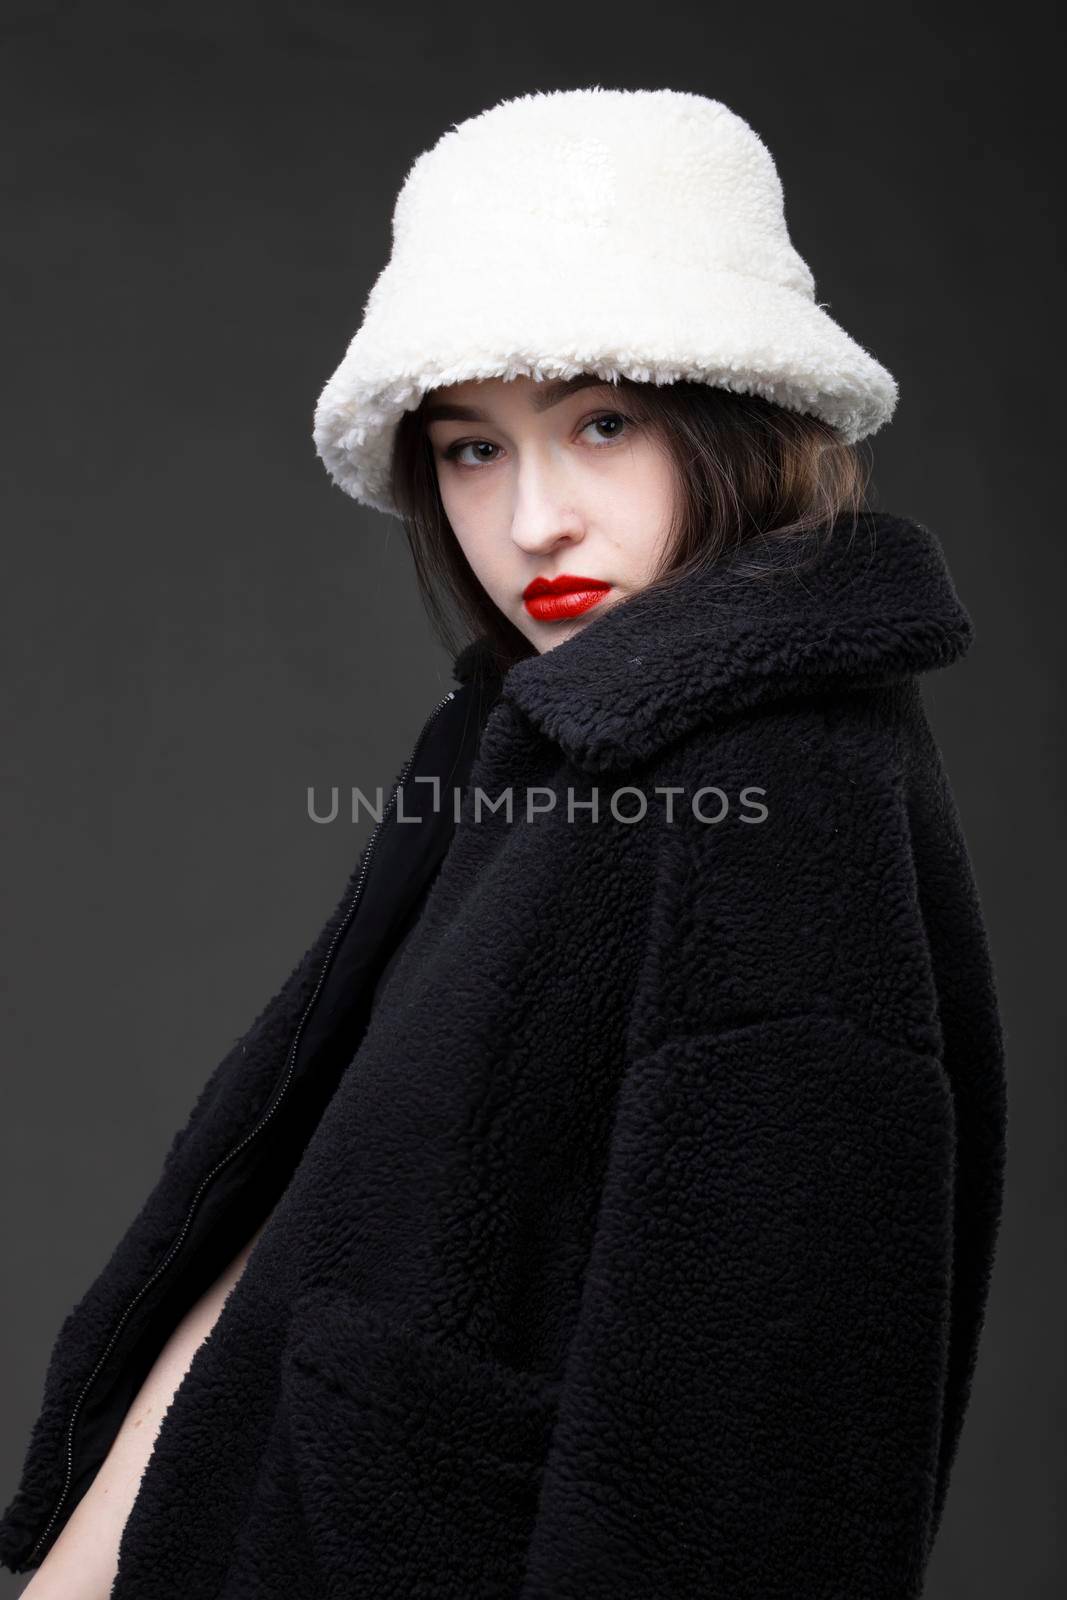 A beautiful girl in a white fur hat and a black fur coat on a gray background.